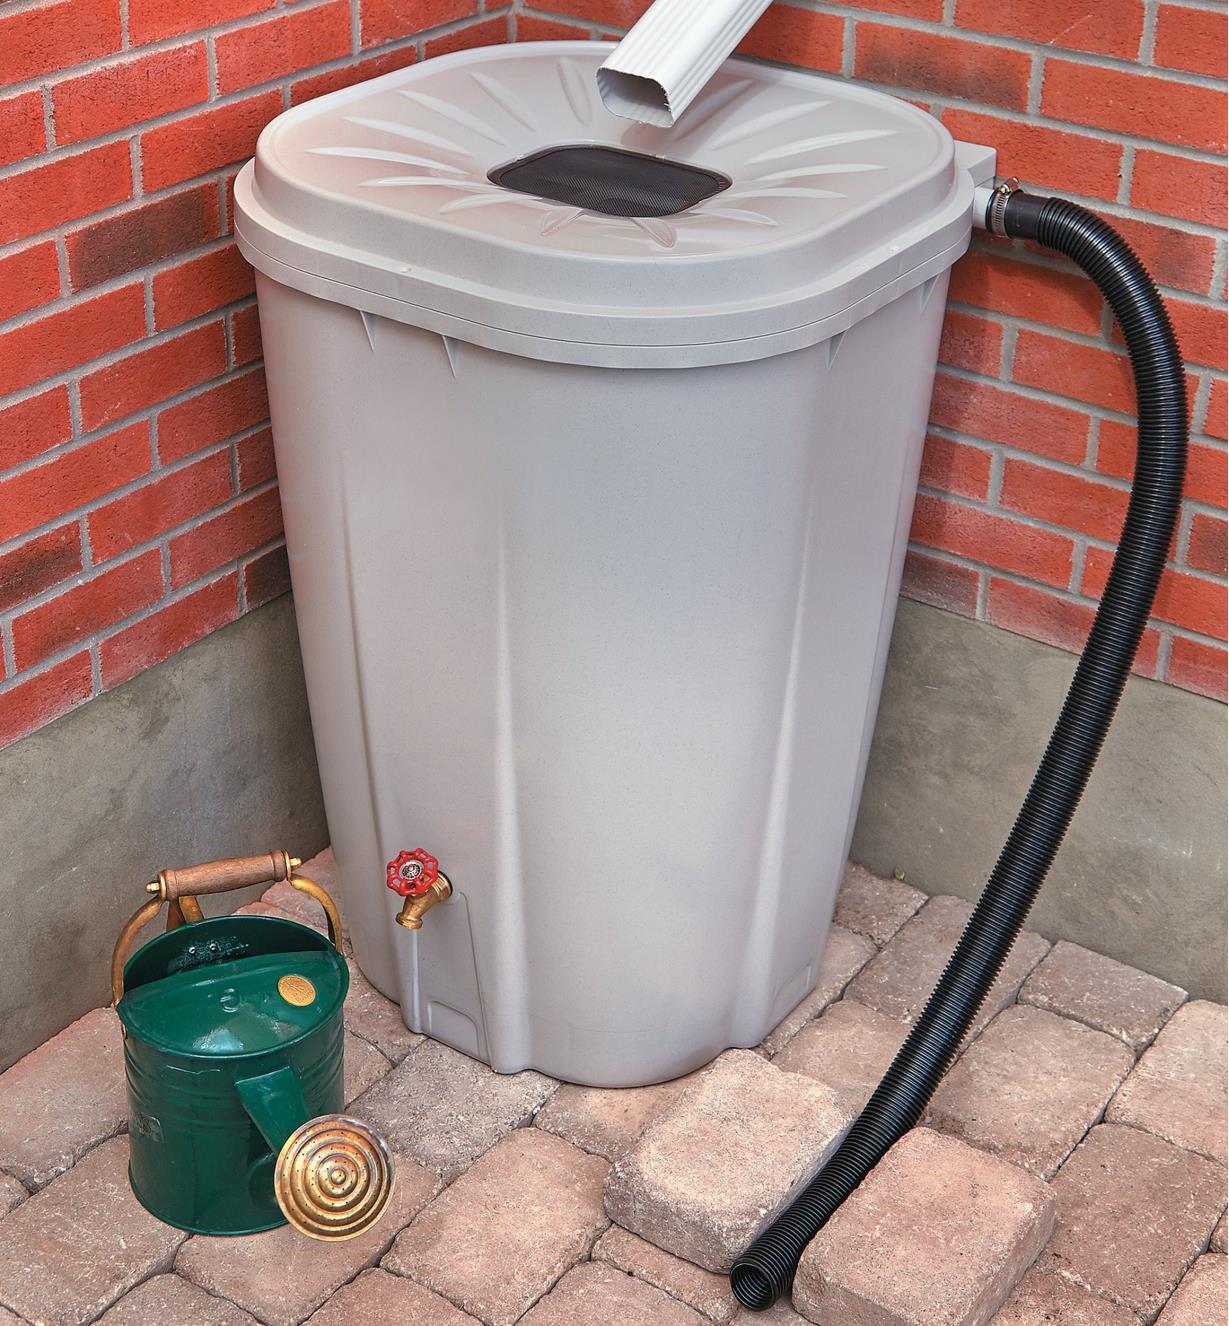 Rain Barrel positioned on a patio under a downspout